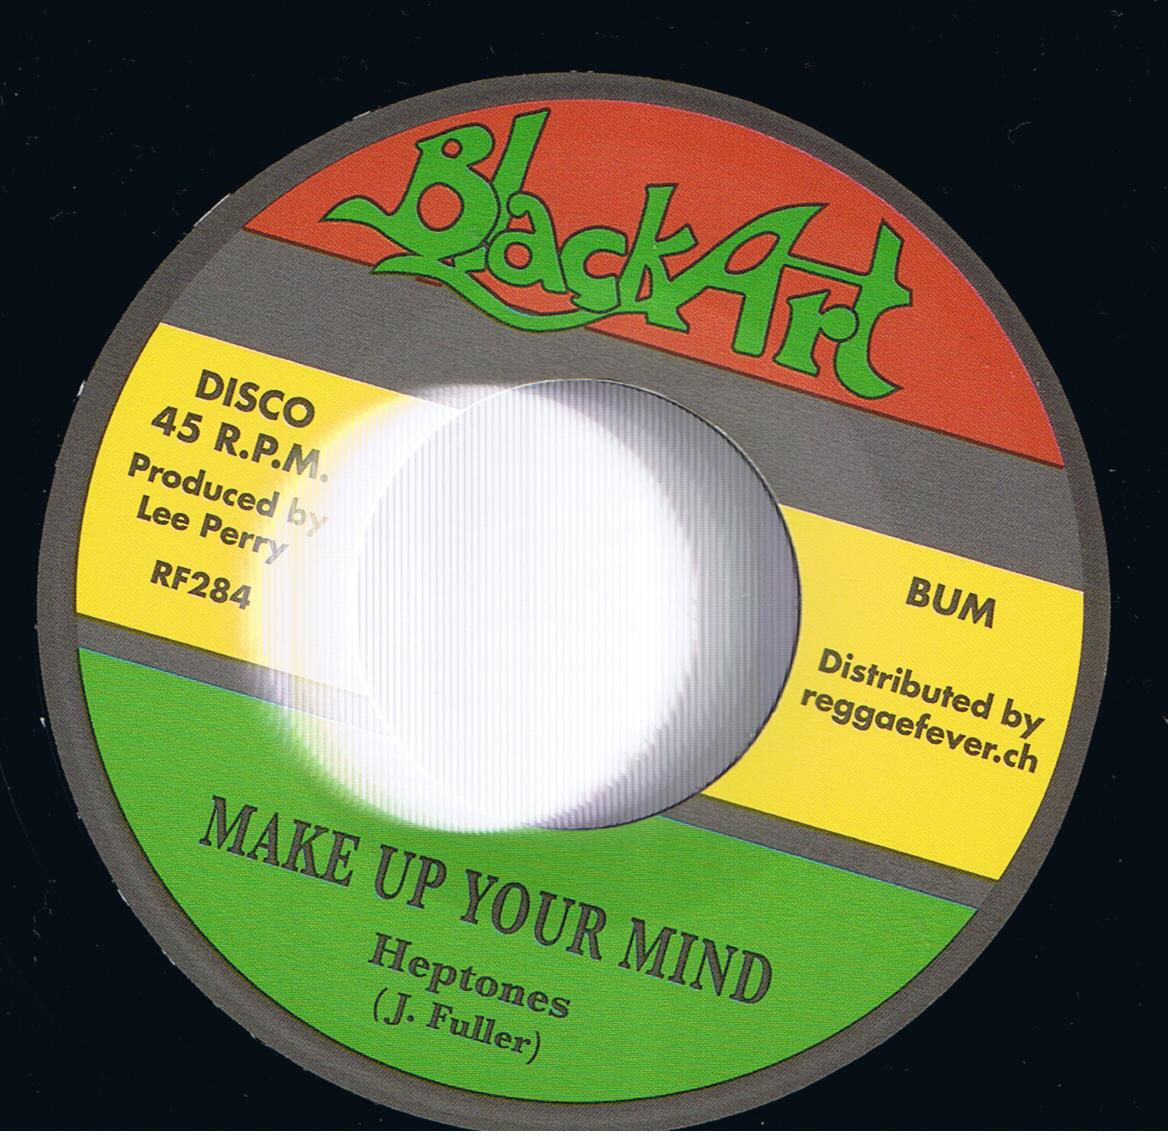 The Heptones - Make Up Your Mind / Road Of Life (7")